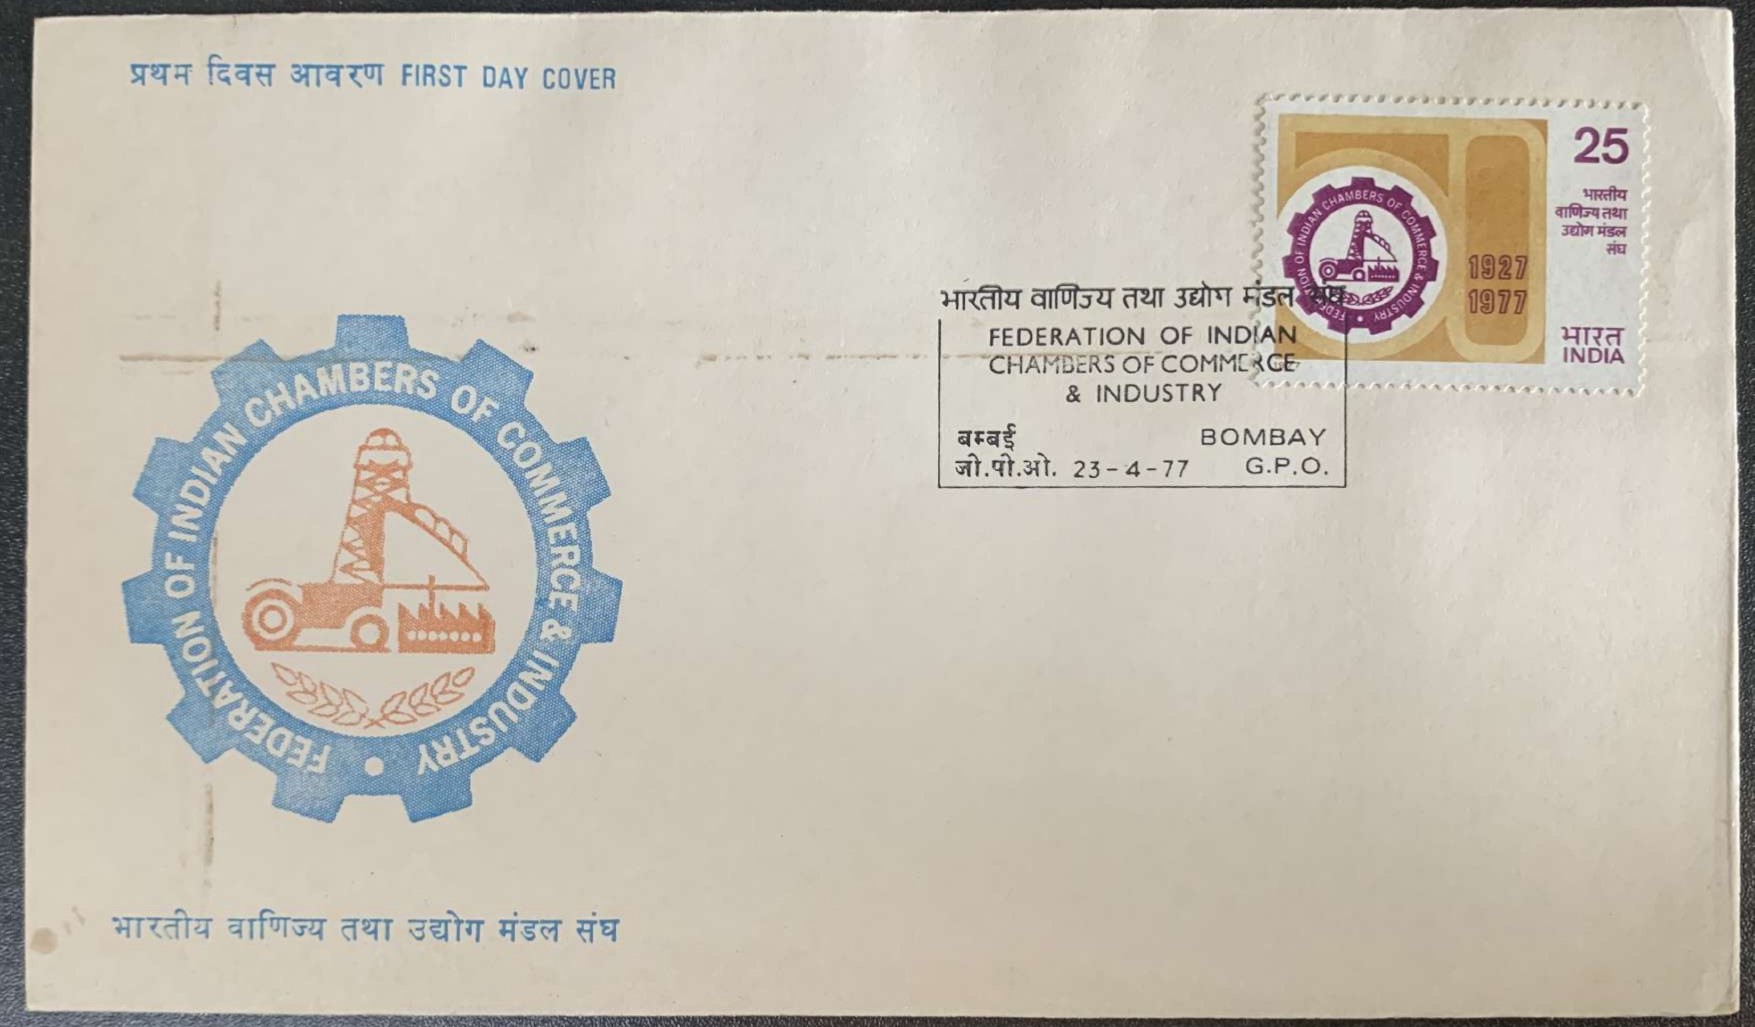 India 1977 Federation of Indian Chambers of Commerce & Industry First Day Cover